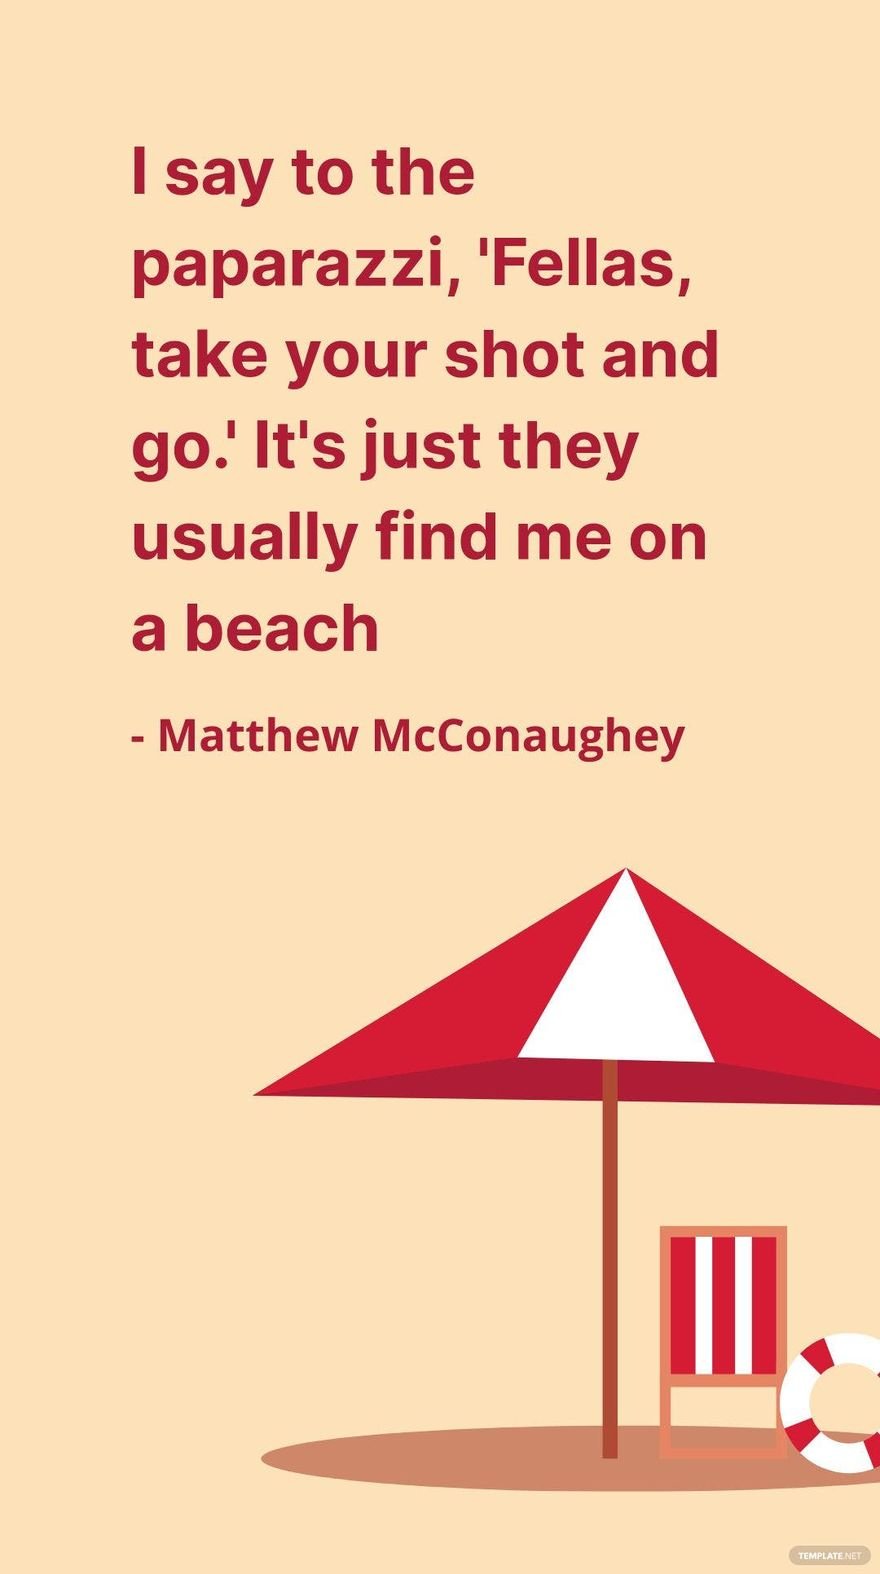 Matthew McConaughey - I say to the paparazzi, 'Fellas, take your shot and go.' It's just they usually find me on a beach